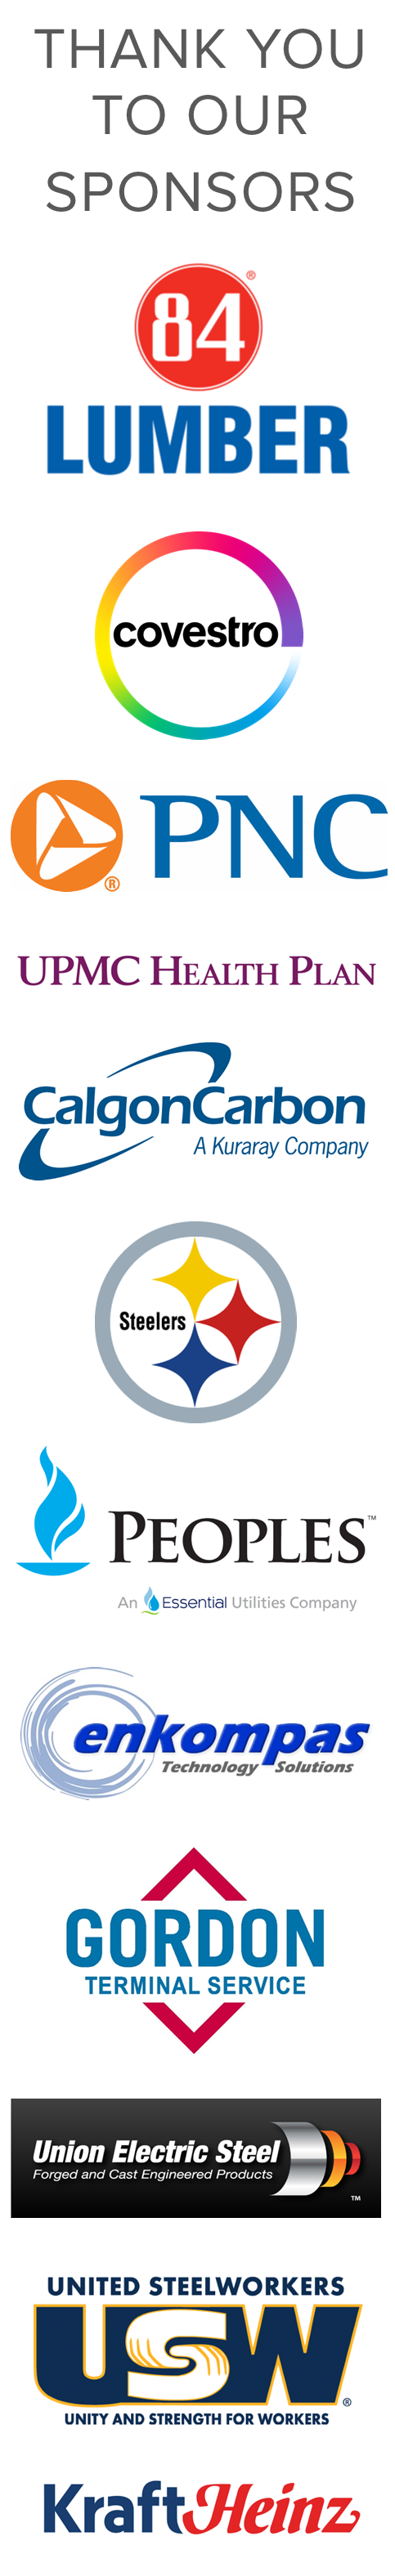 Text "Thank you to our Sponsors" with logos for 84 Lumber, Covestro, PNC Bank, UPMC Health Plan, Calgon Carbon, Pittsburgh Steelers, Peoples, enkompas, Gordon Terminal, Union Electric Steel, United Steelworkers, and Kraft Heinz